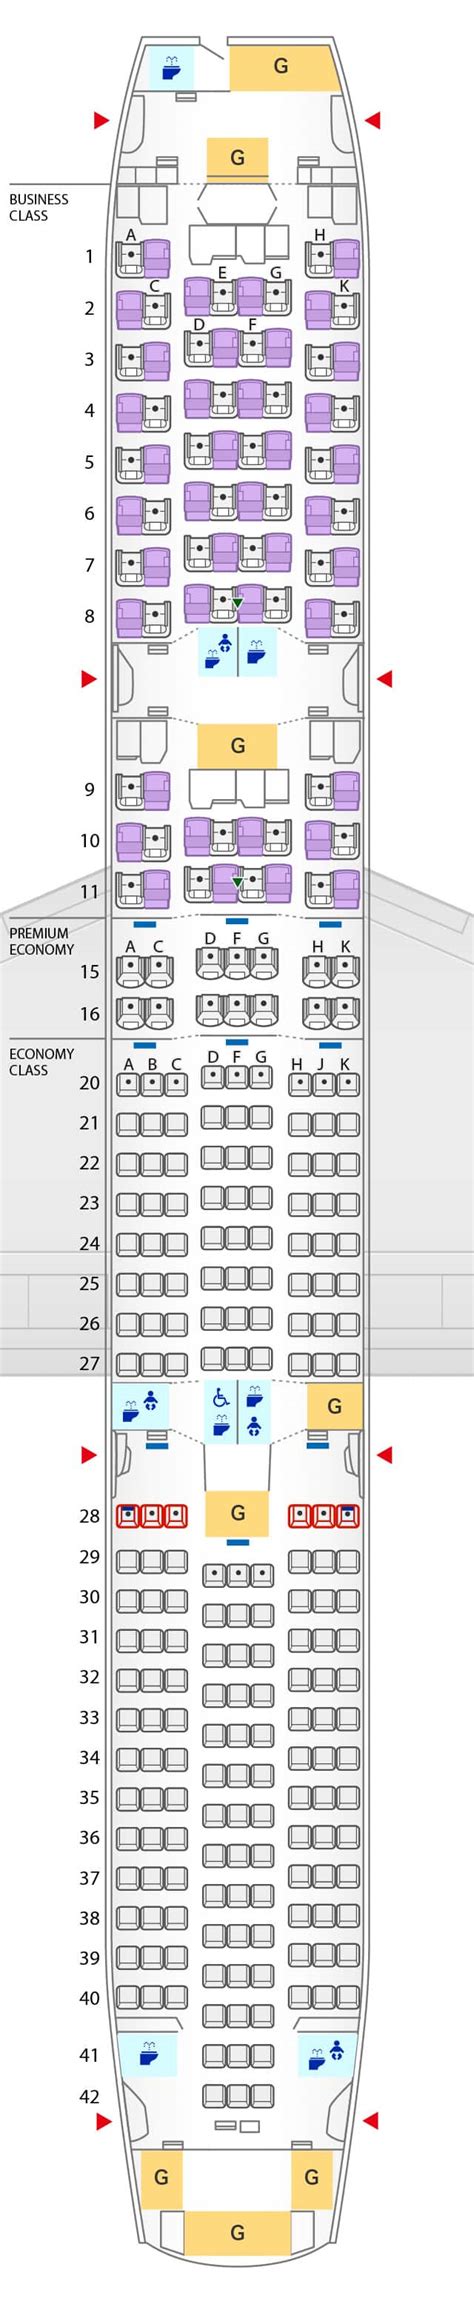 787-9 seat map. This is the best seat in the house, from my point of view. It’s an aisle of two middle aisle seats in the smaller 3 row section of business/first. Nearest the “generally” cleanest/largest bathroom. Service is a bit more relaxed. 3D isn’t a bad seat either though. Seats lie almost flat. The headrest keeps it up a bit. 